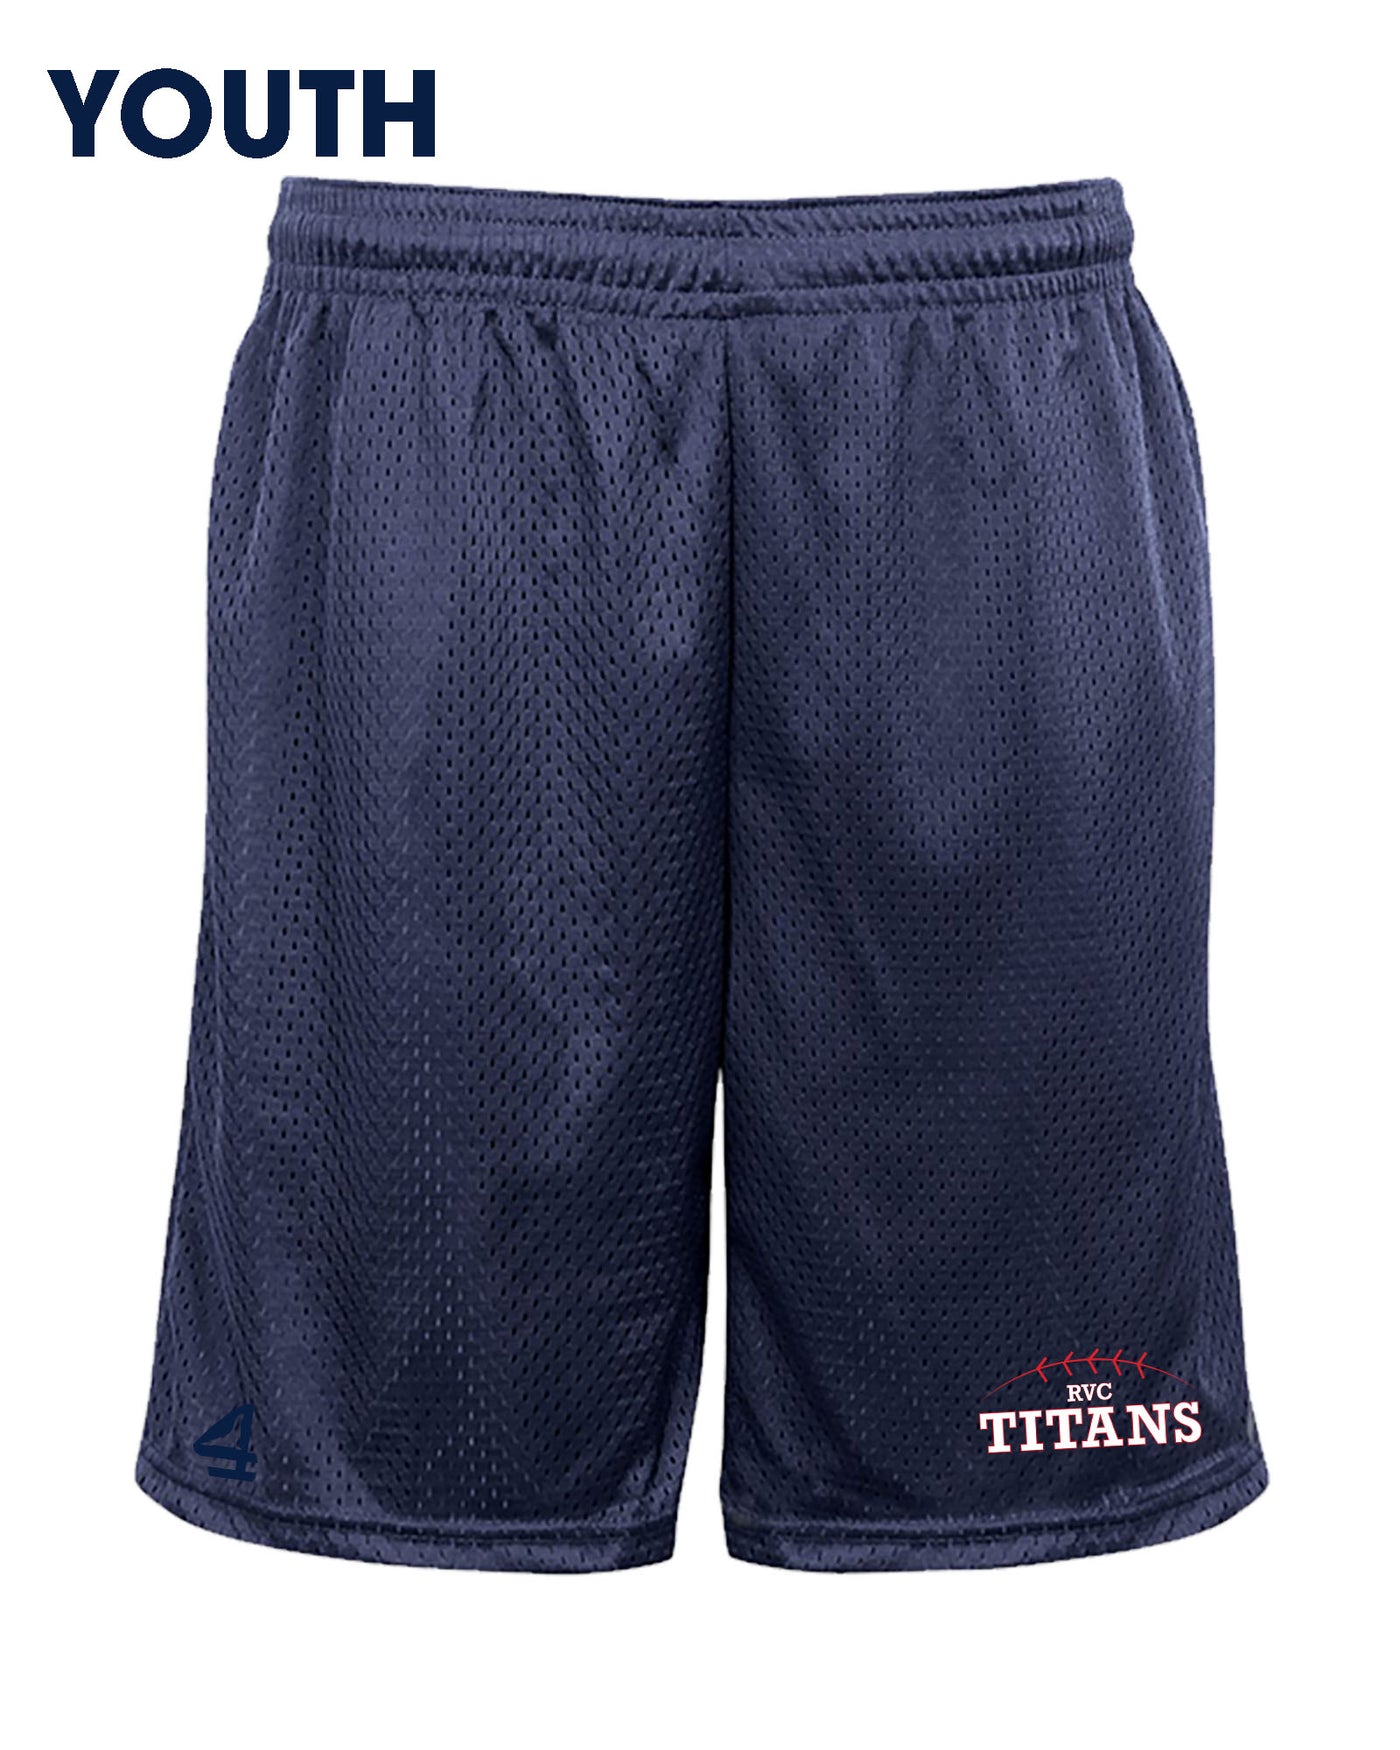 YOUTH Titans Mesh Game Day Shorts With Pockets